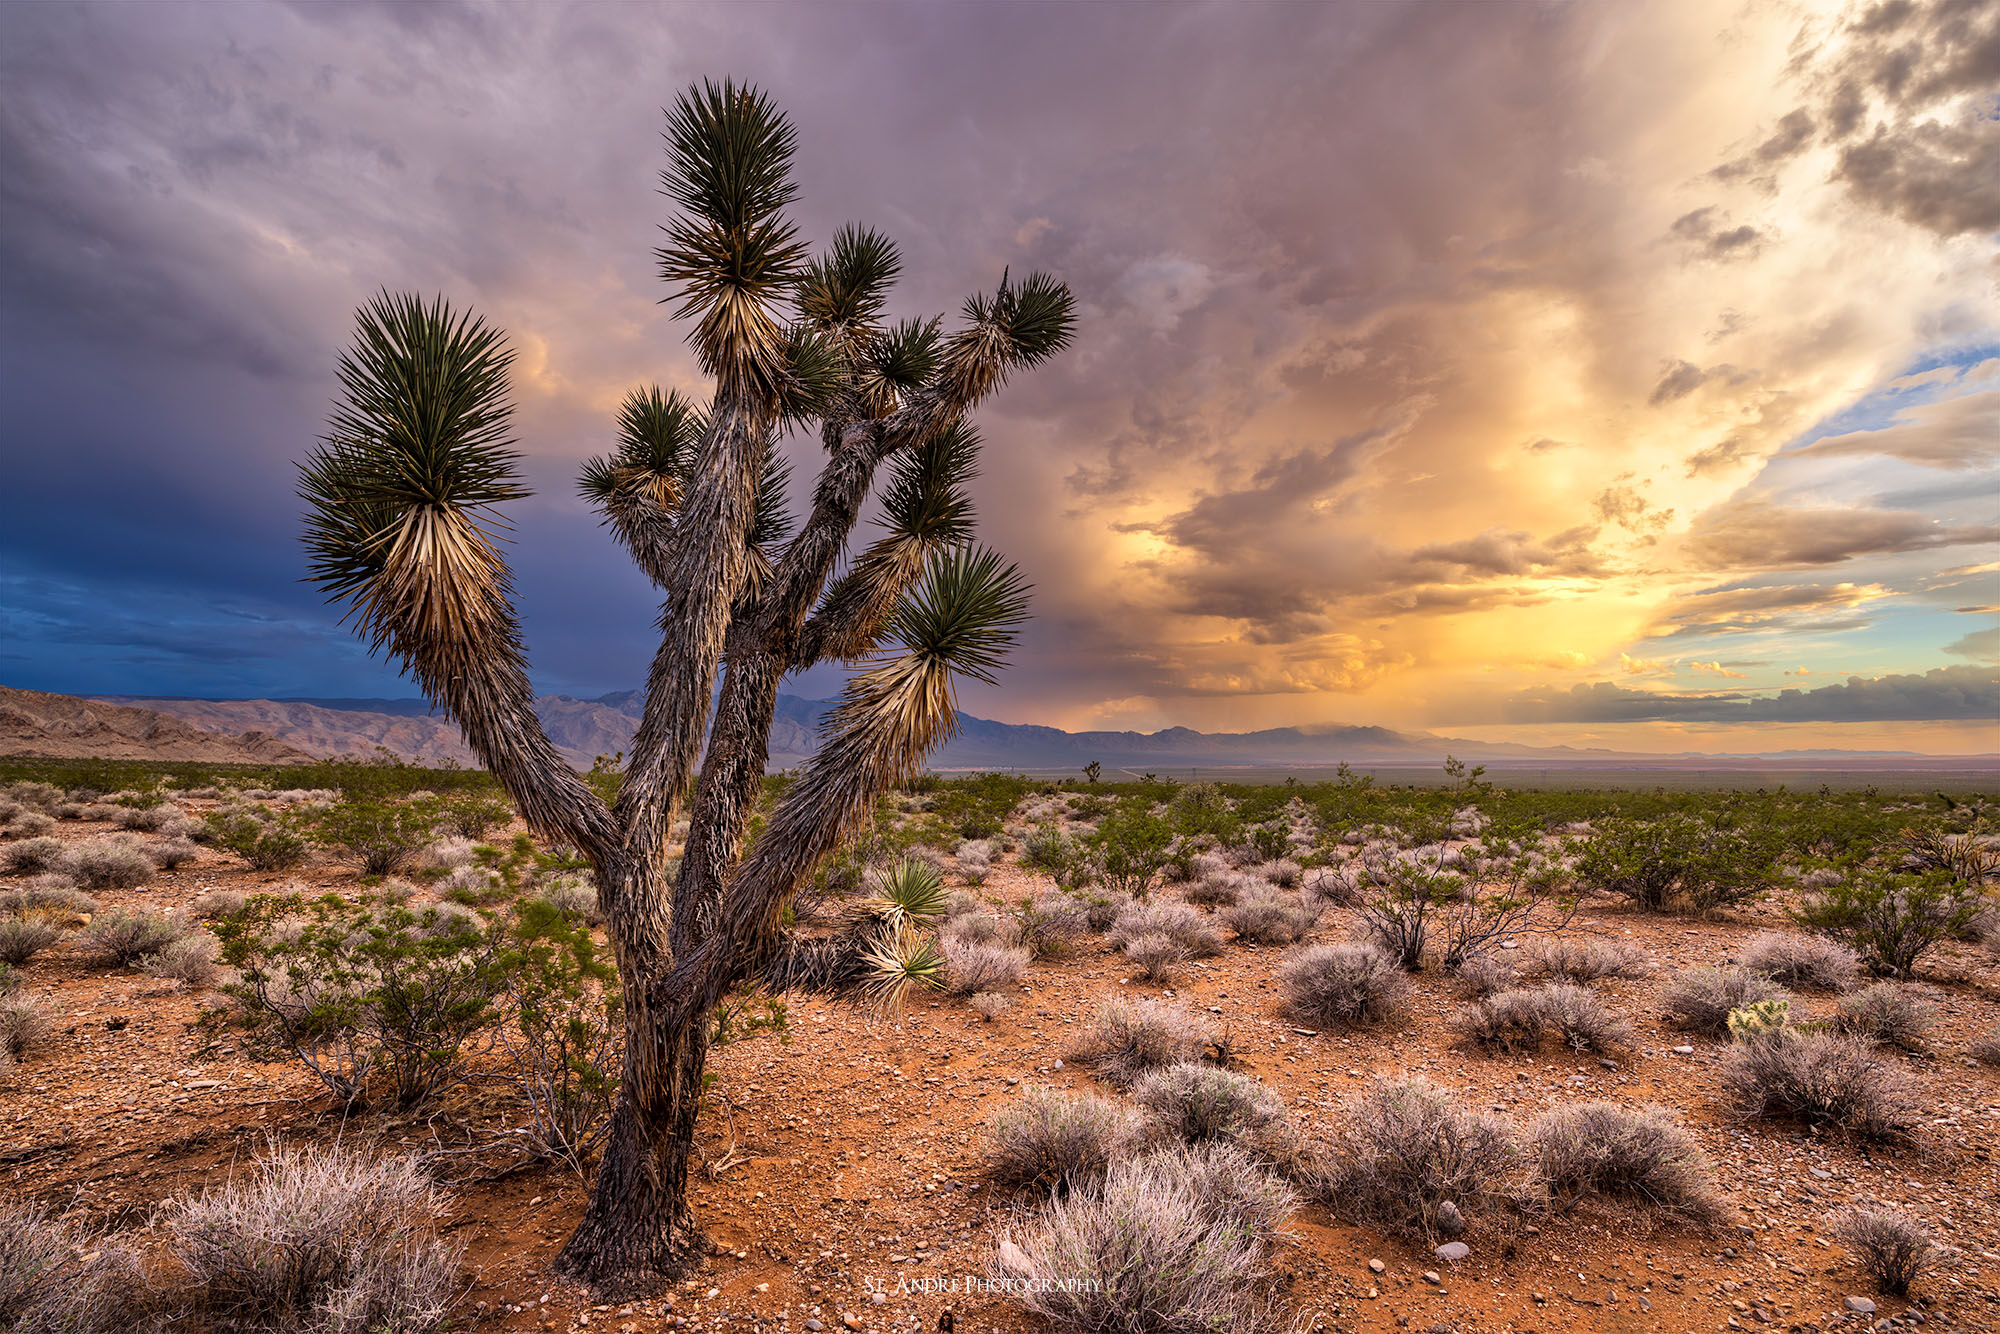 A lone Joshua tree stands in a desert landscape while a thunderstorm brews in the distance and the setting sun colors the sky. 